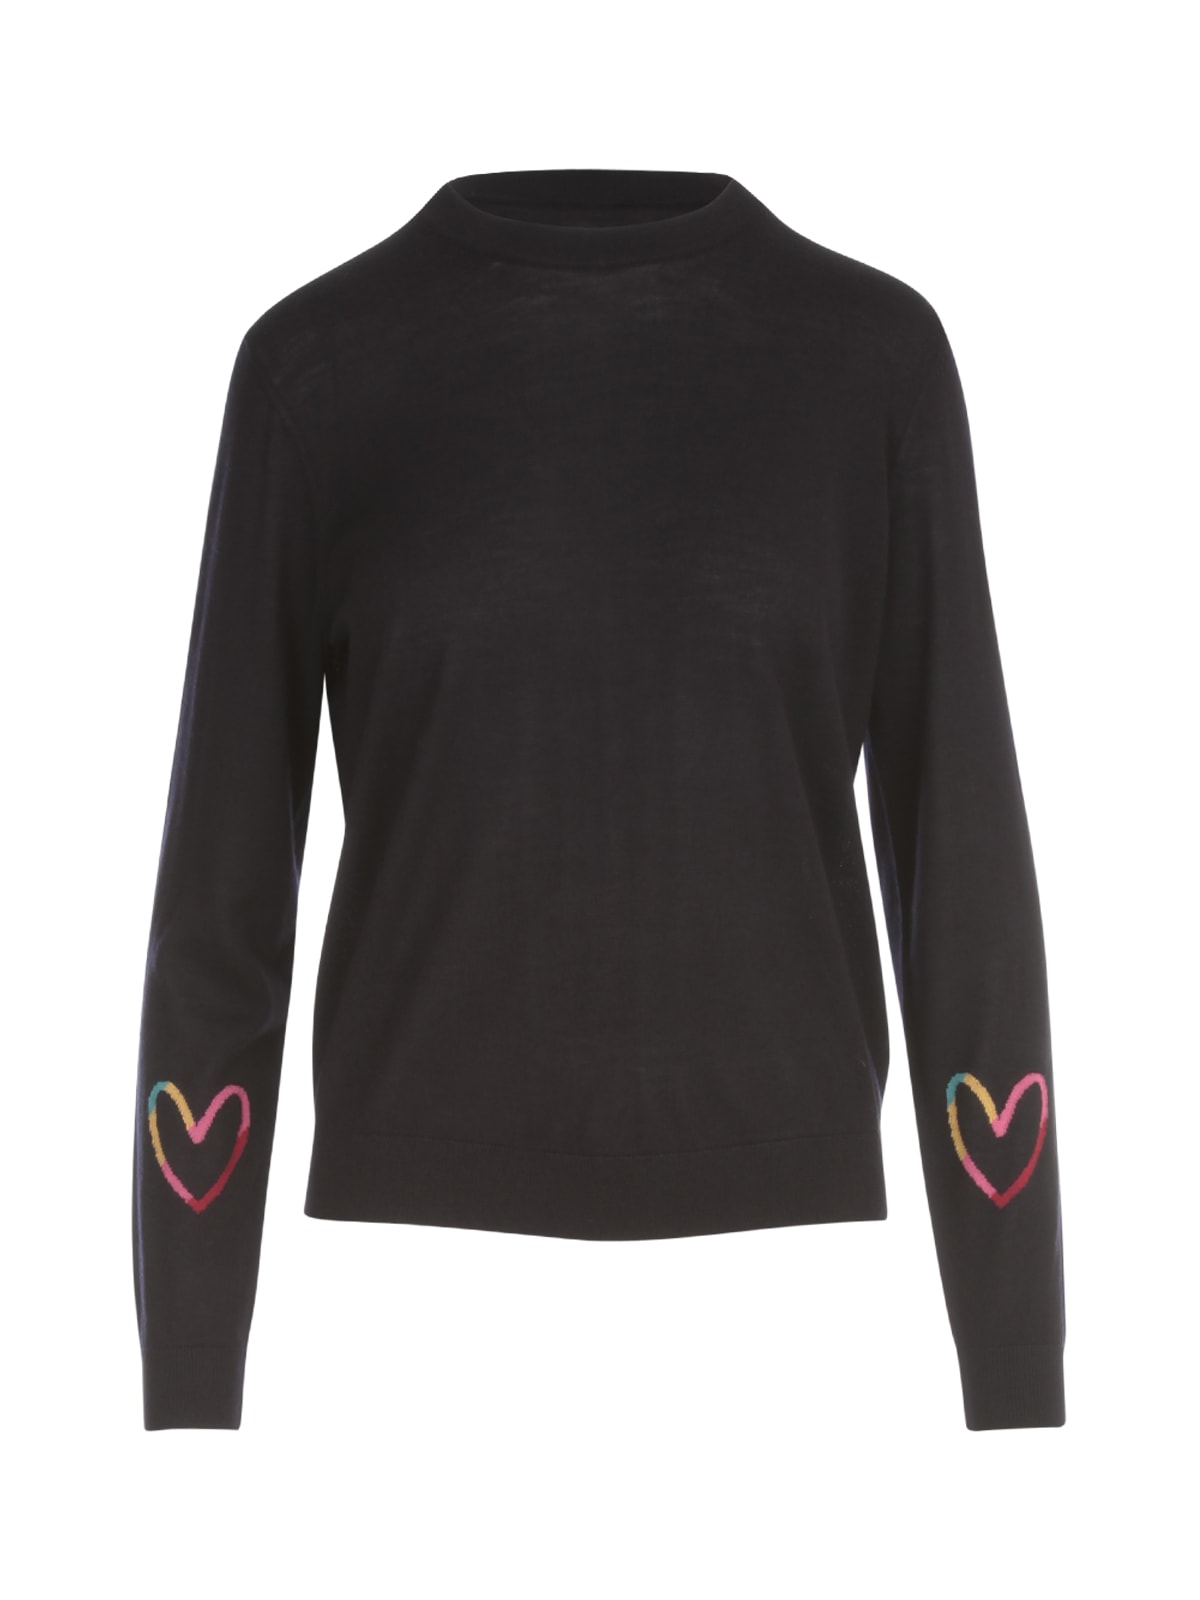 PS by Paul Smith Embroidered Hearts Crew Neck L/s Sweater